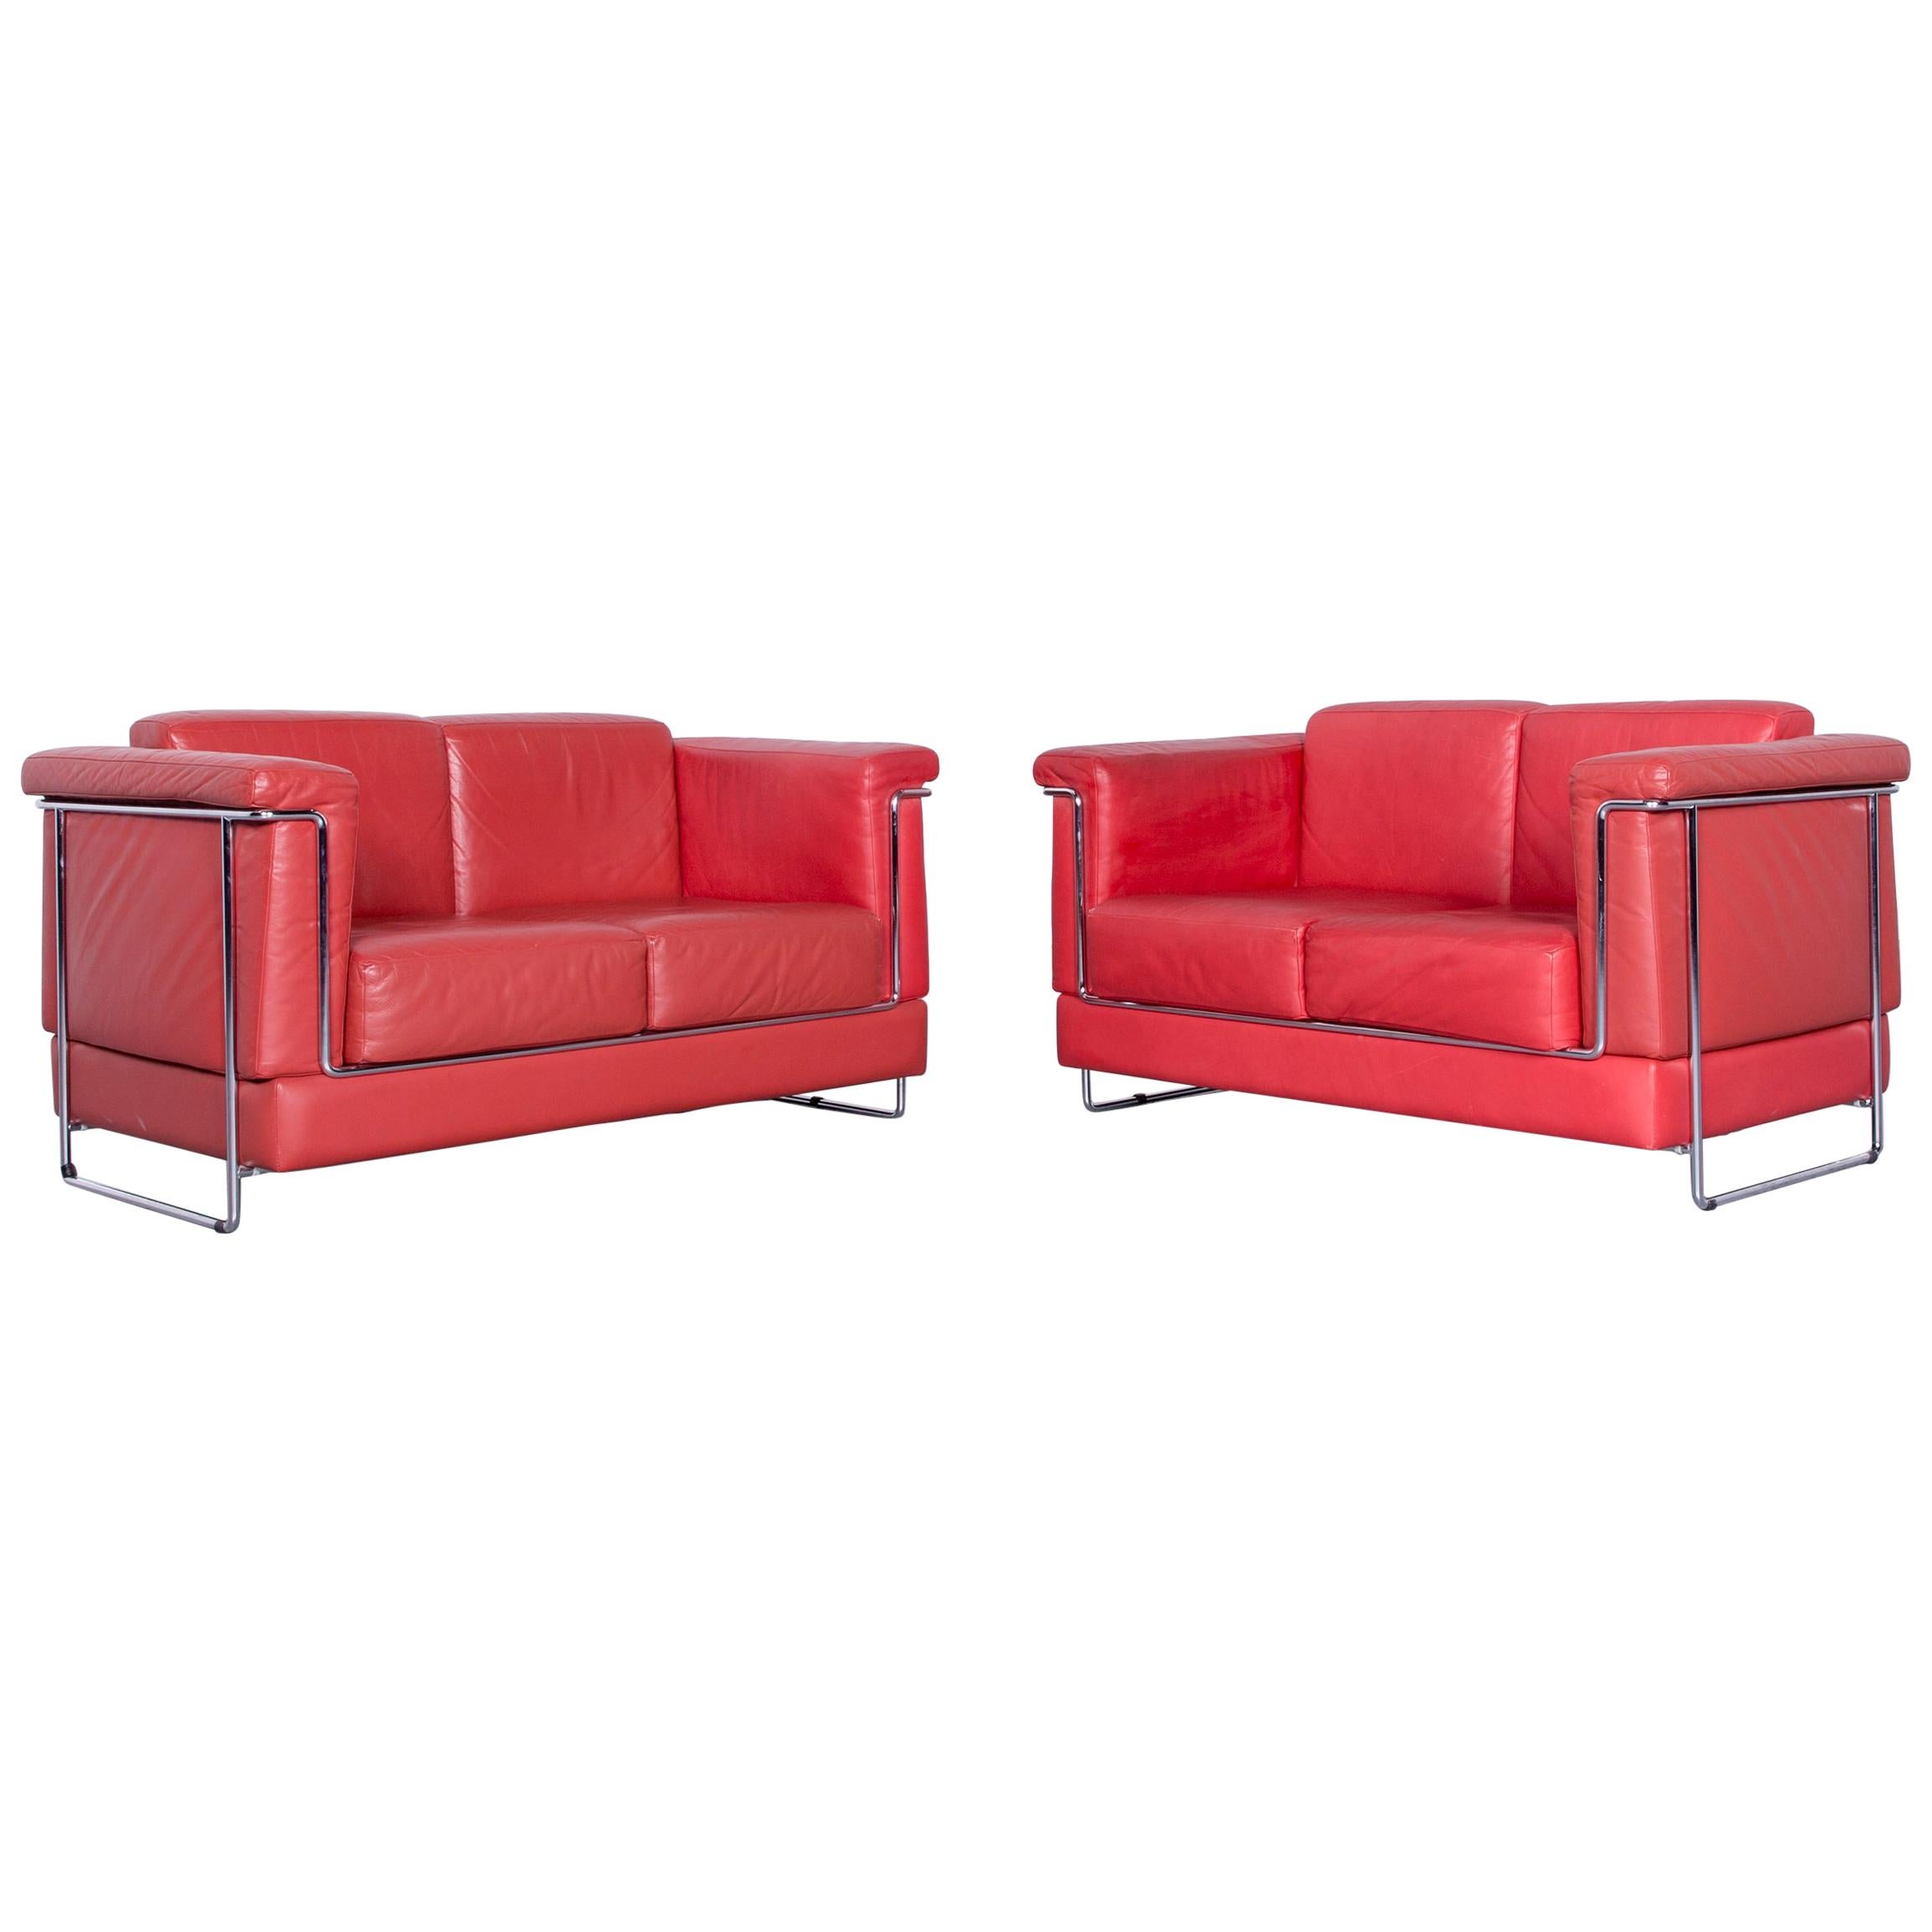 Züco Carat Designer Leather Sofa Set Red Two-Seat Couch